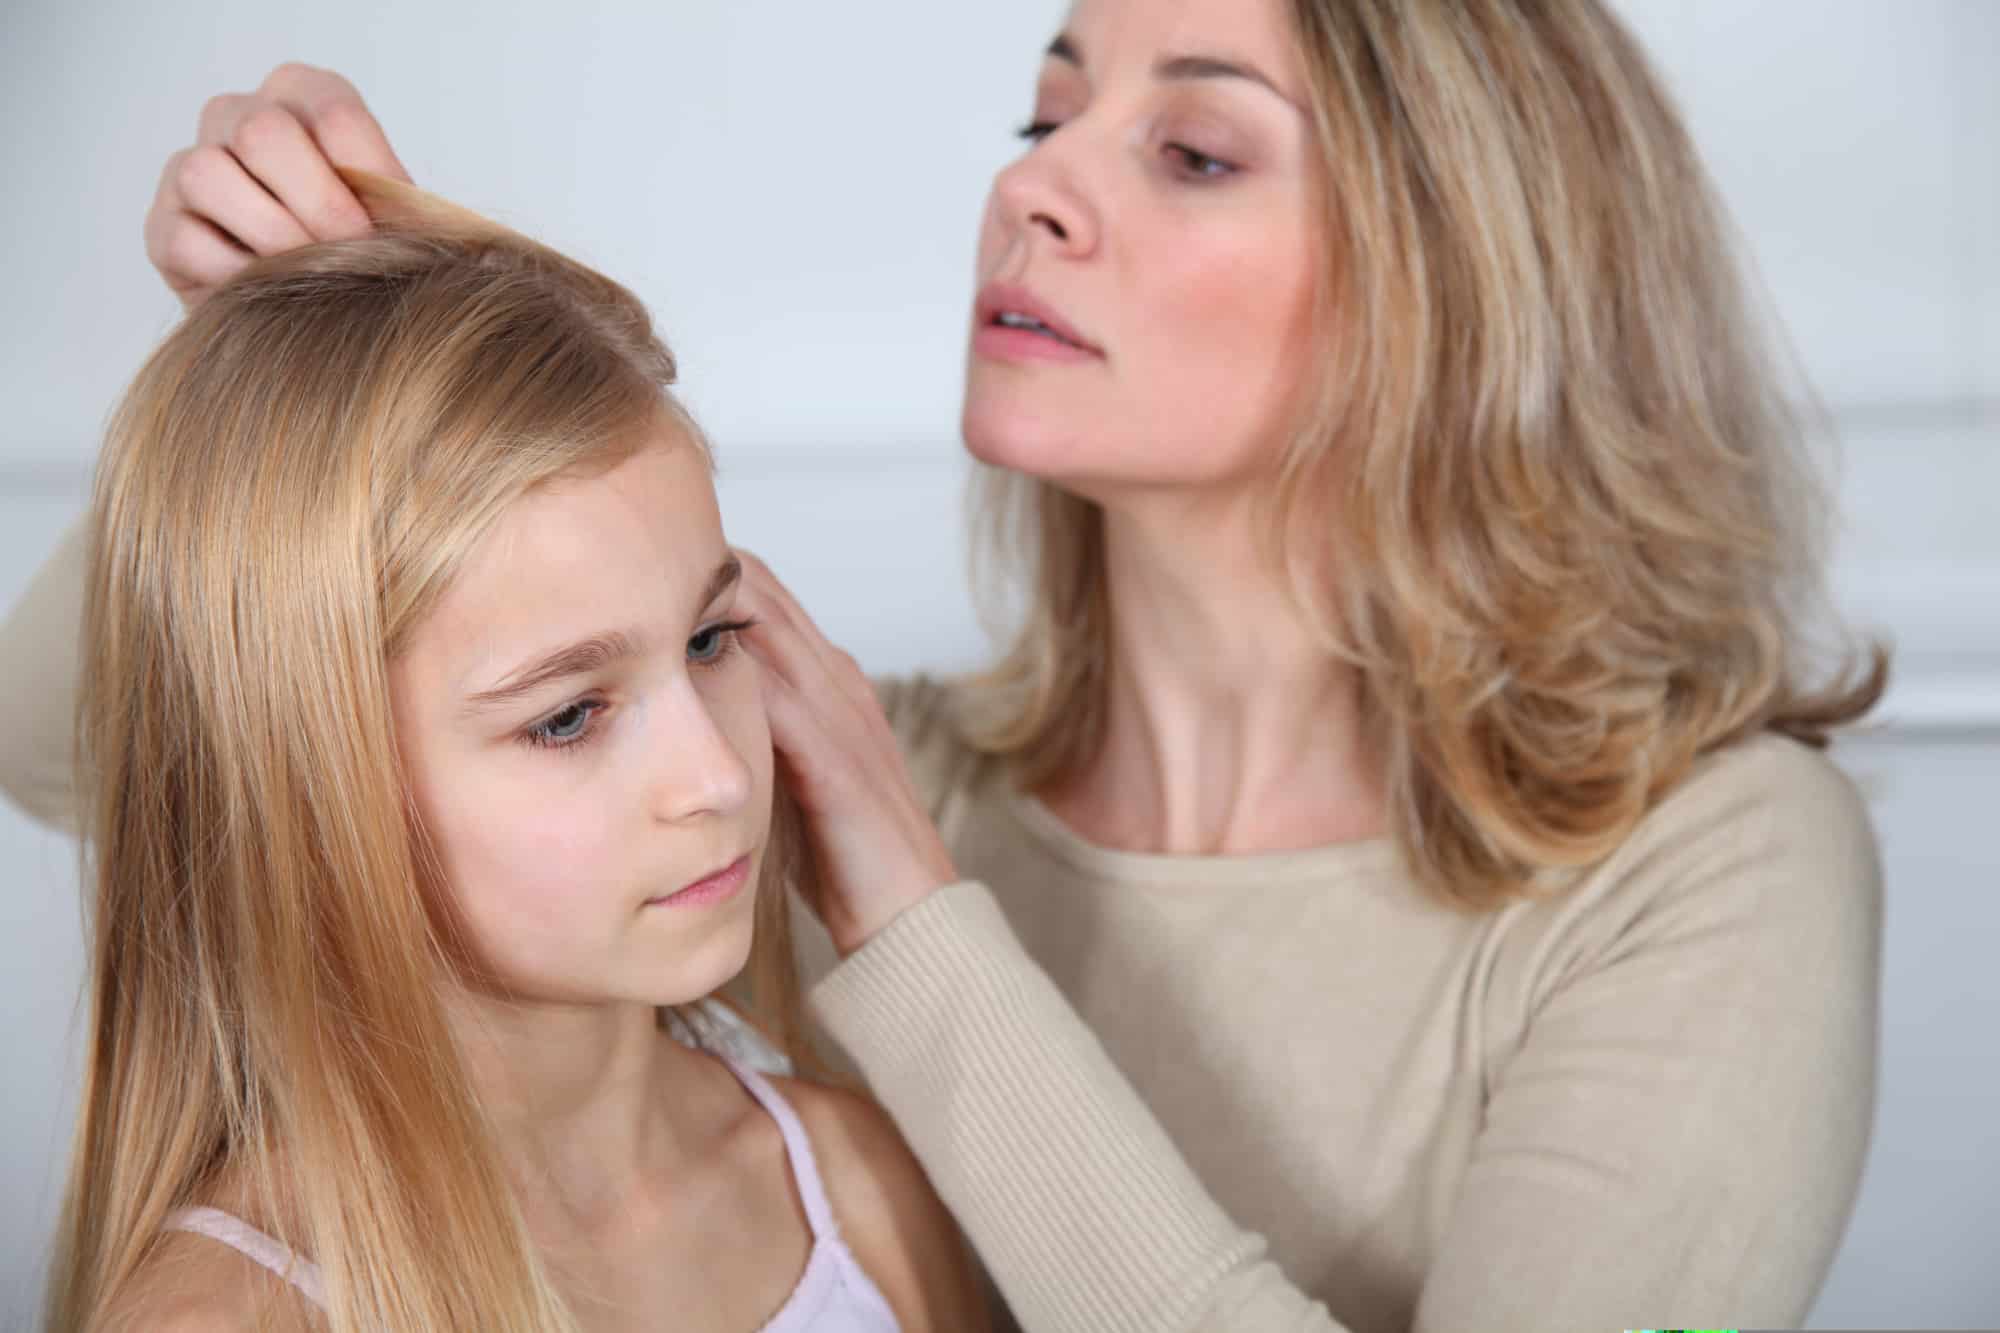 Mother treating daughter's hair against lice